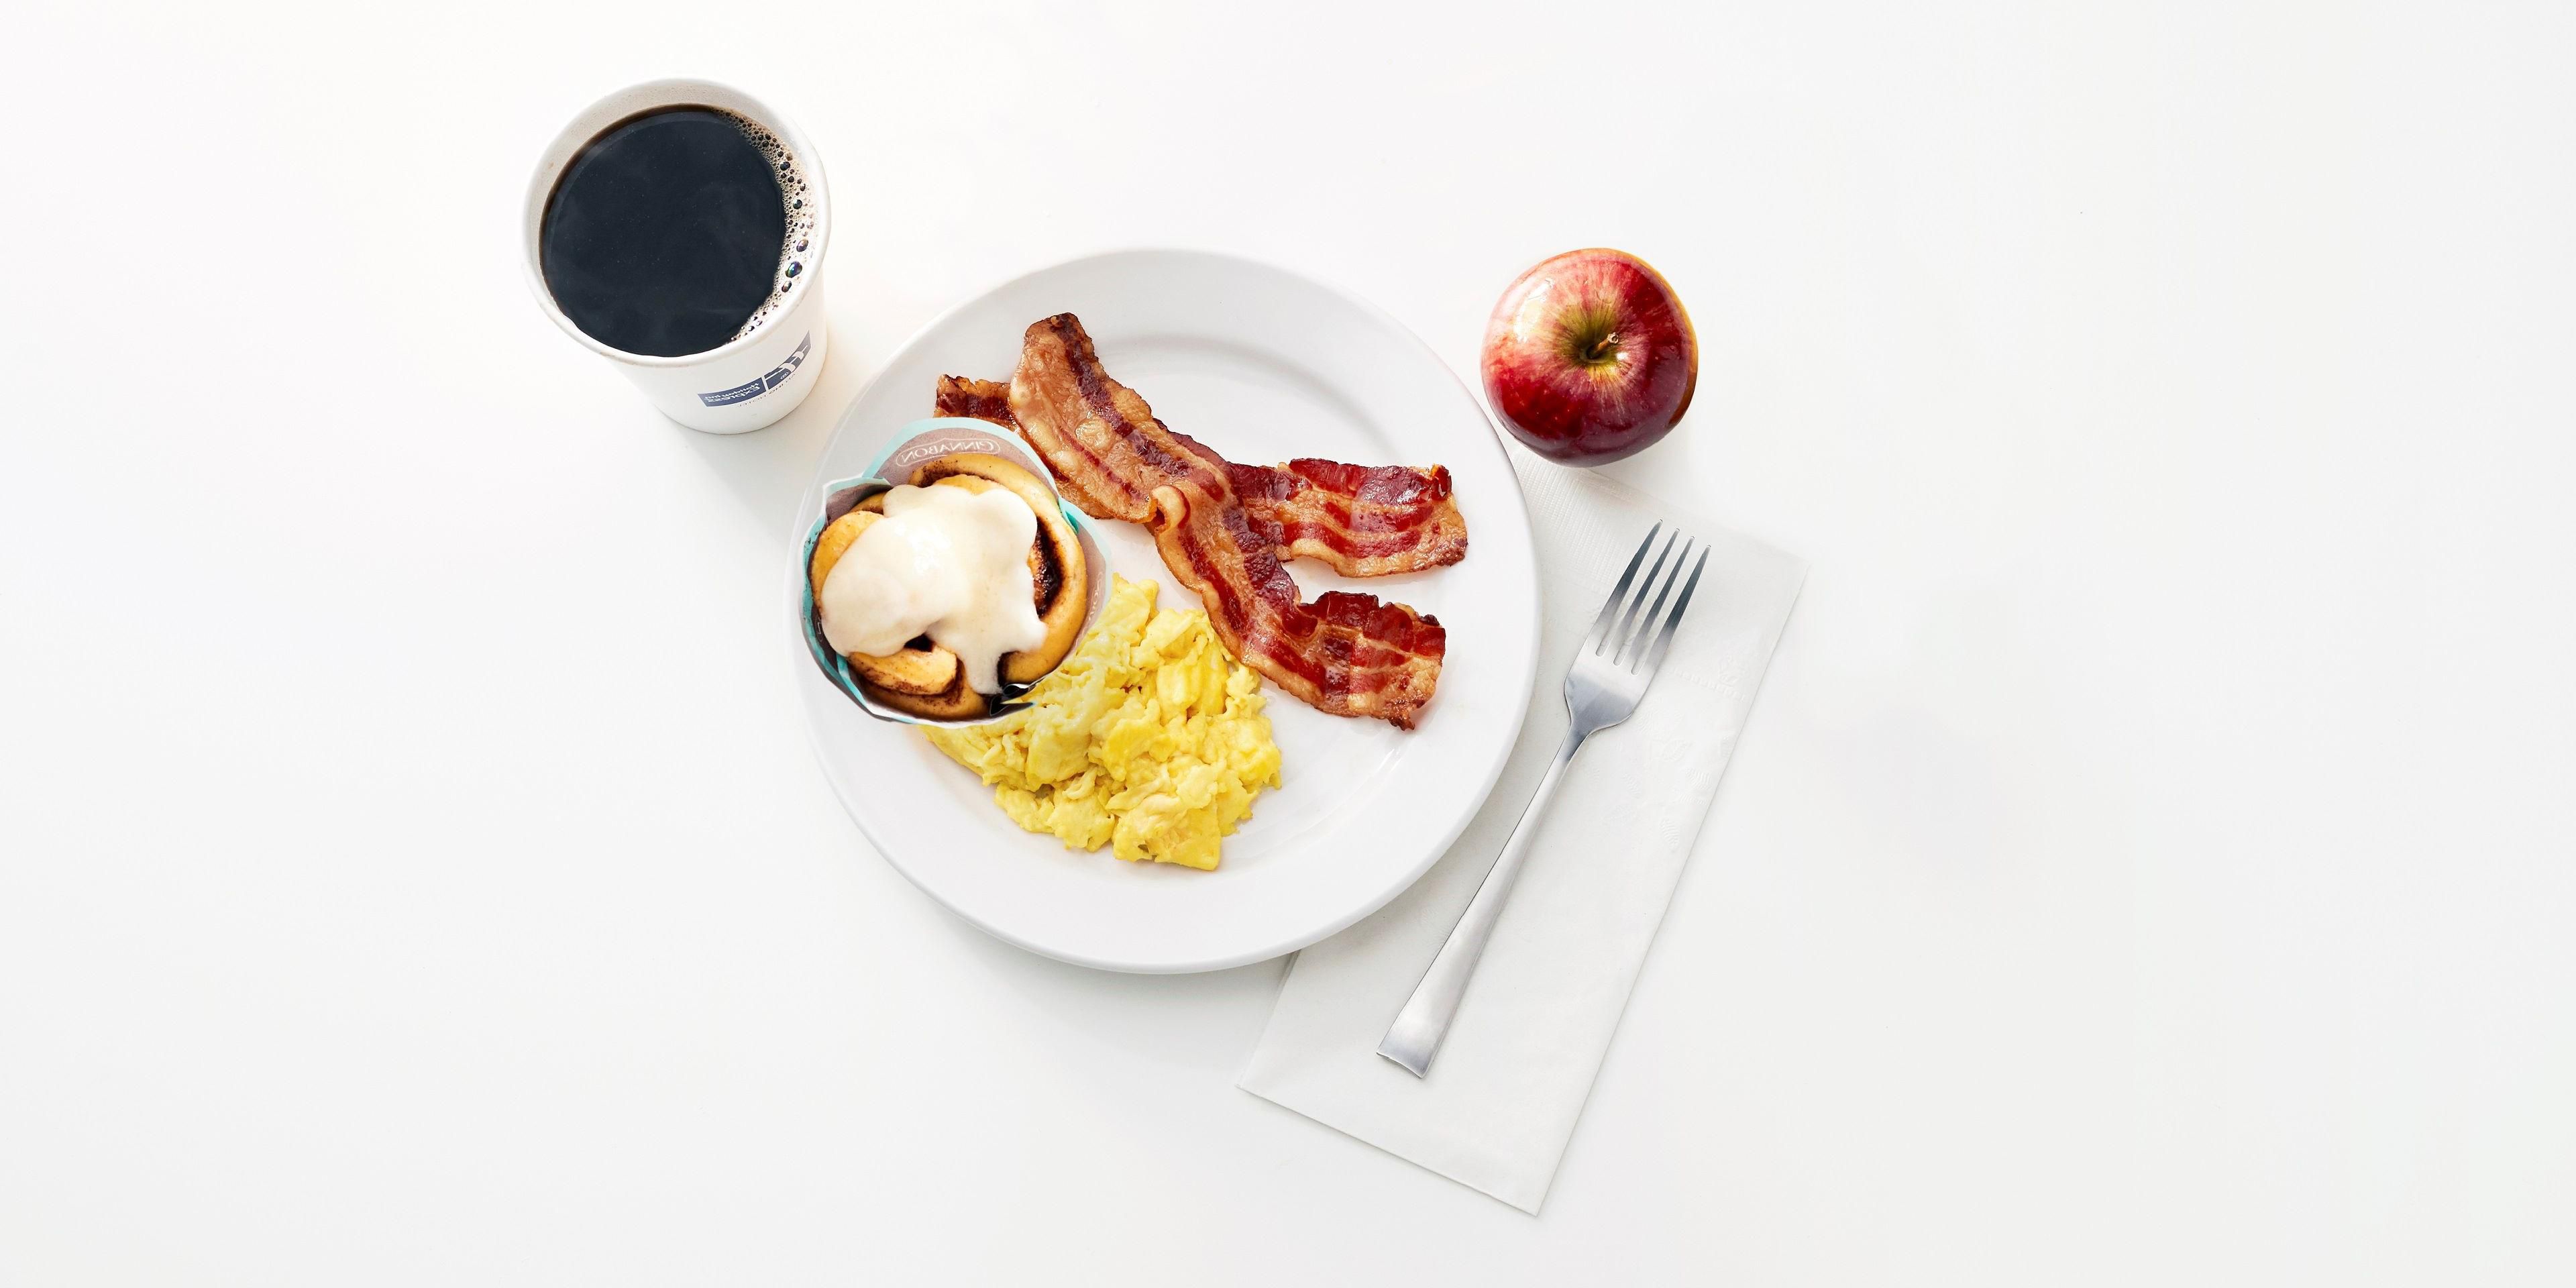 Kick start your day with our free Express Start Breakfast, with grab ‘n’ go options and favorites such as eggs and bacon, hot pancakes, our signature cinnamon rolls and fresh coffee. Offered from 6:00 AM to 9:00 AM